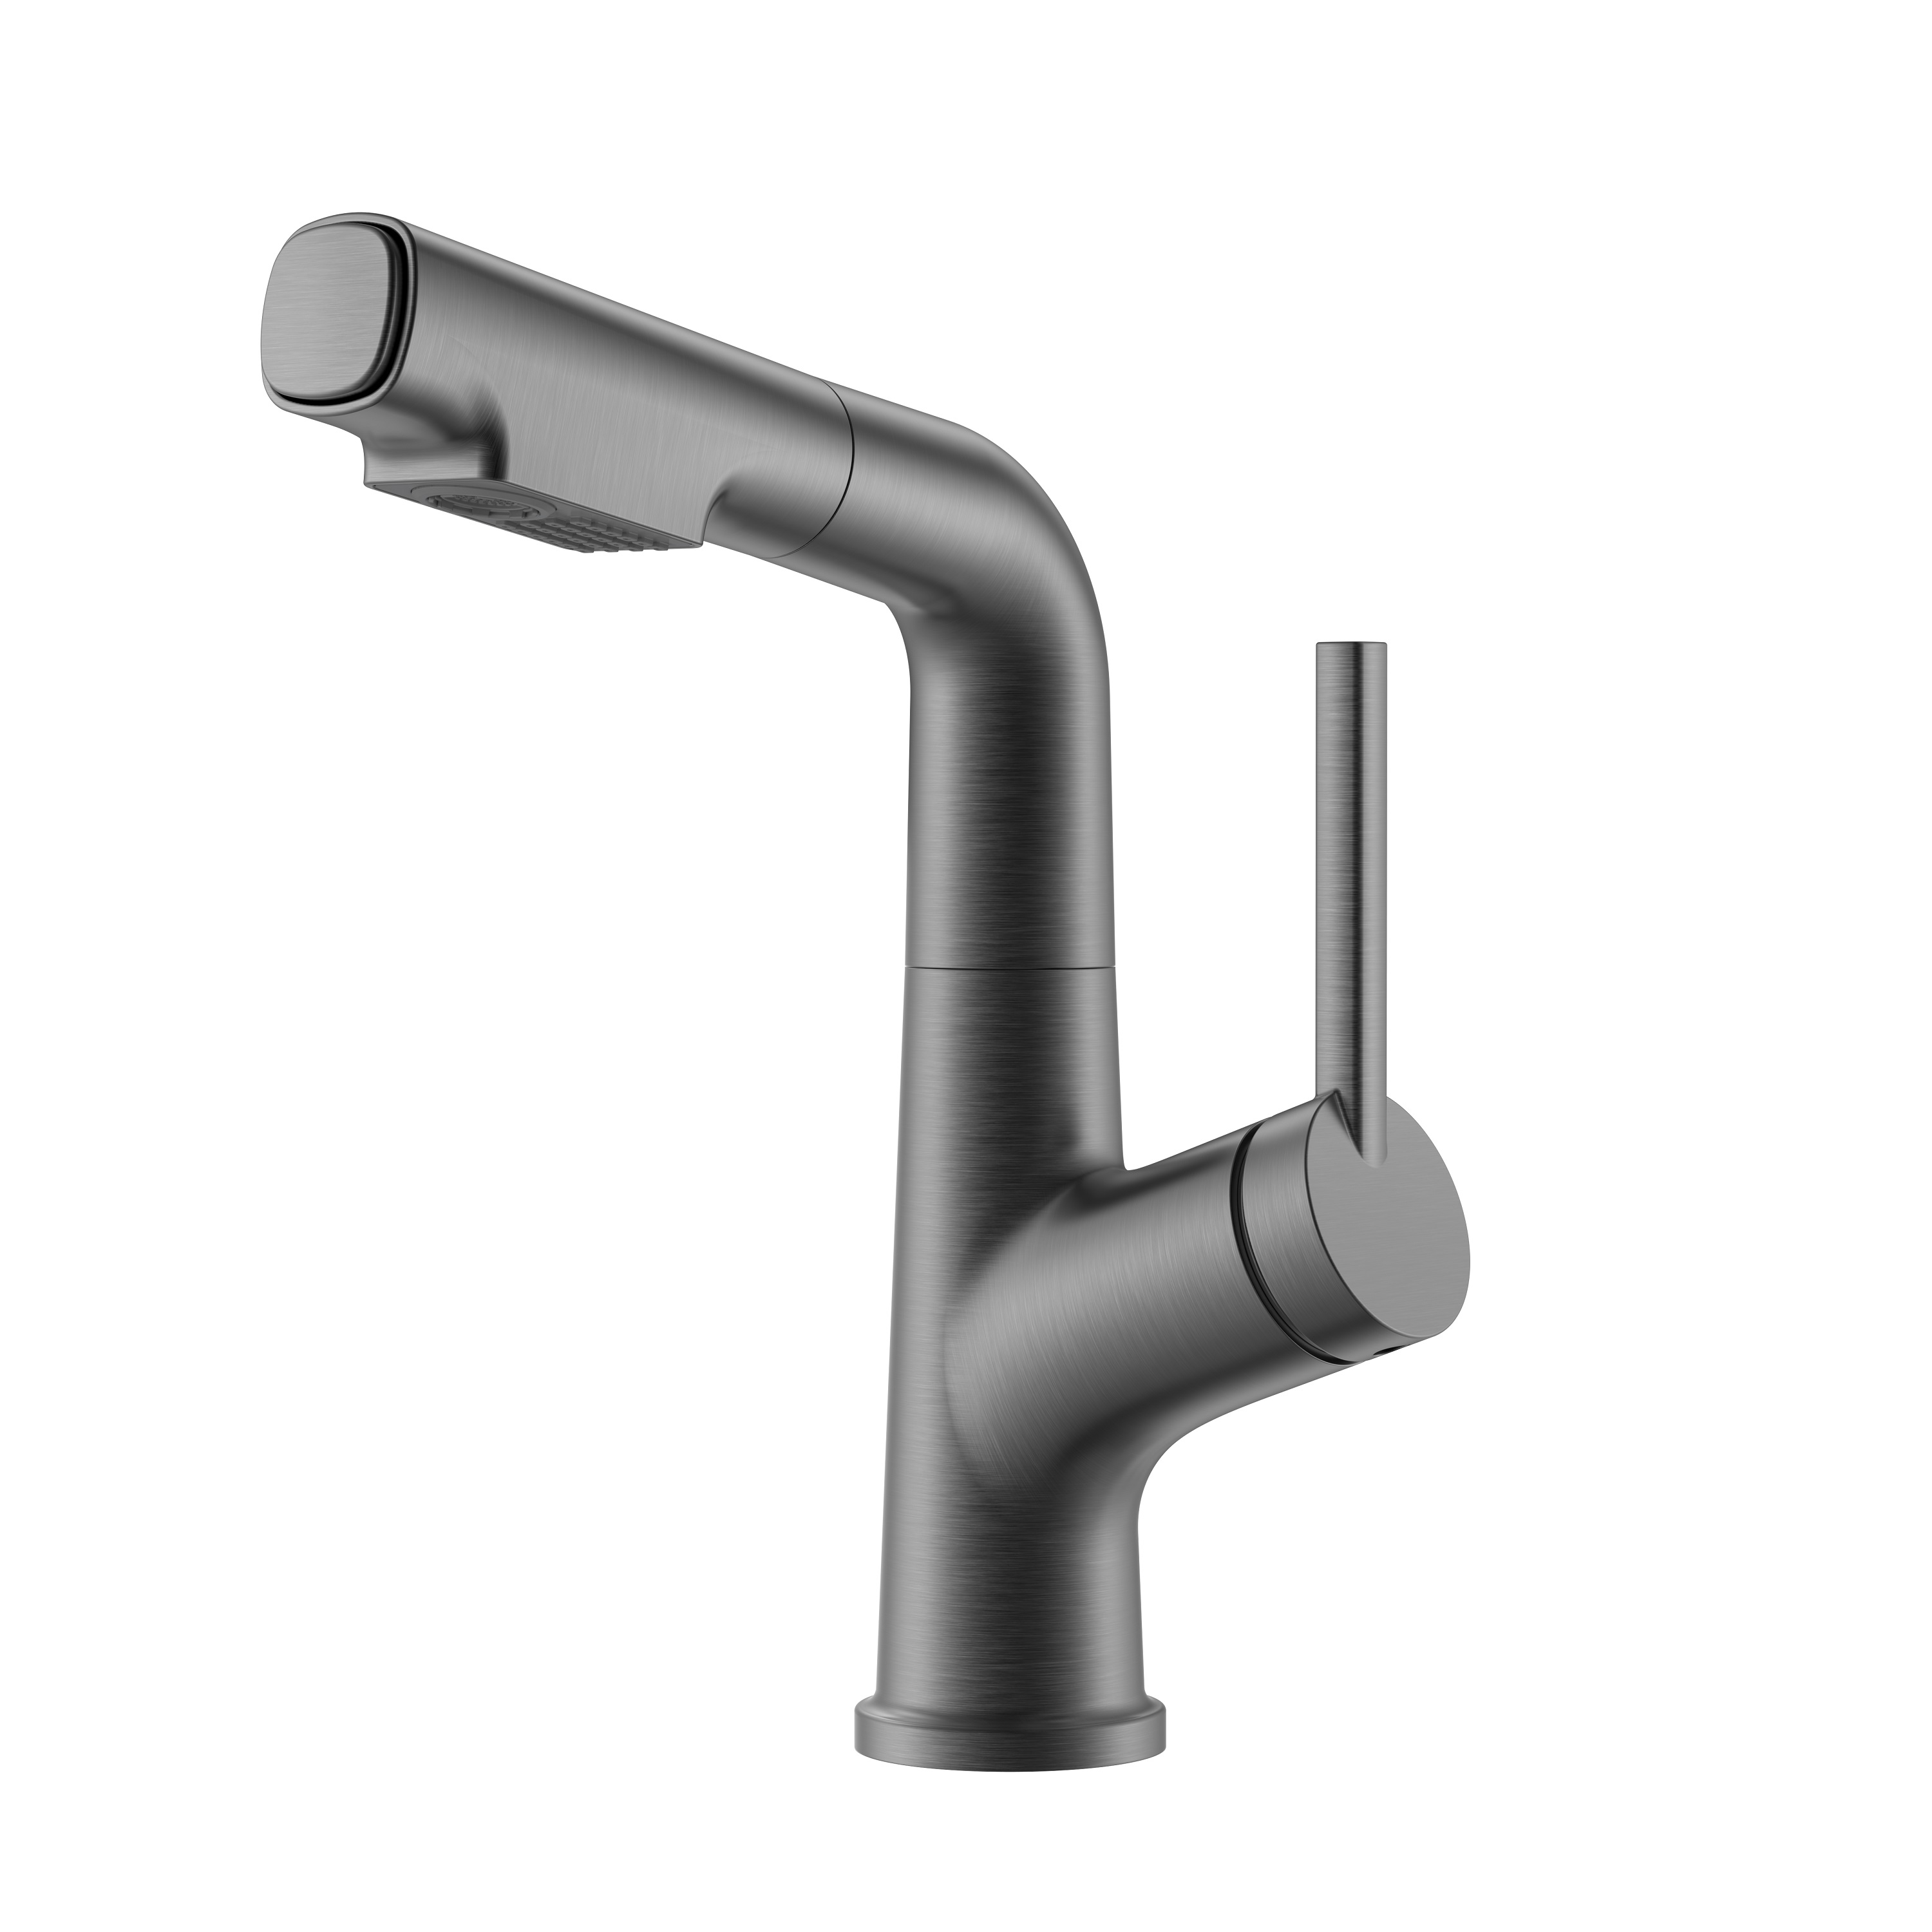 Black Stainless Adjustable Hieght Bathroom Faucet Pull Out Bathroom Faucet